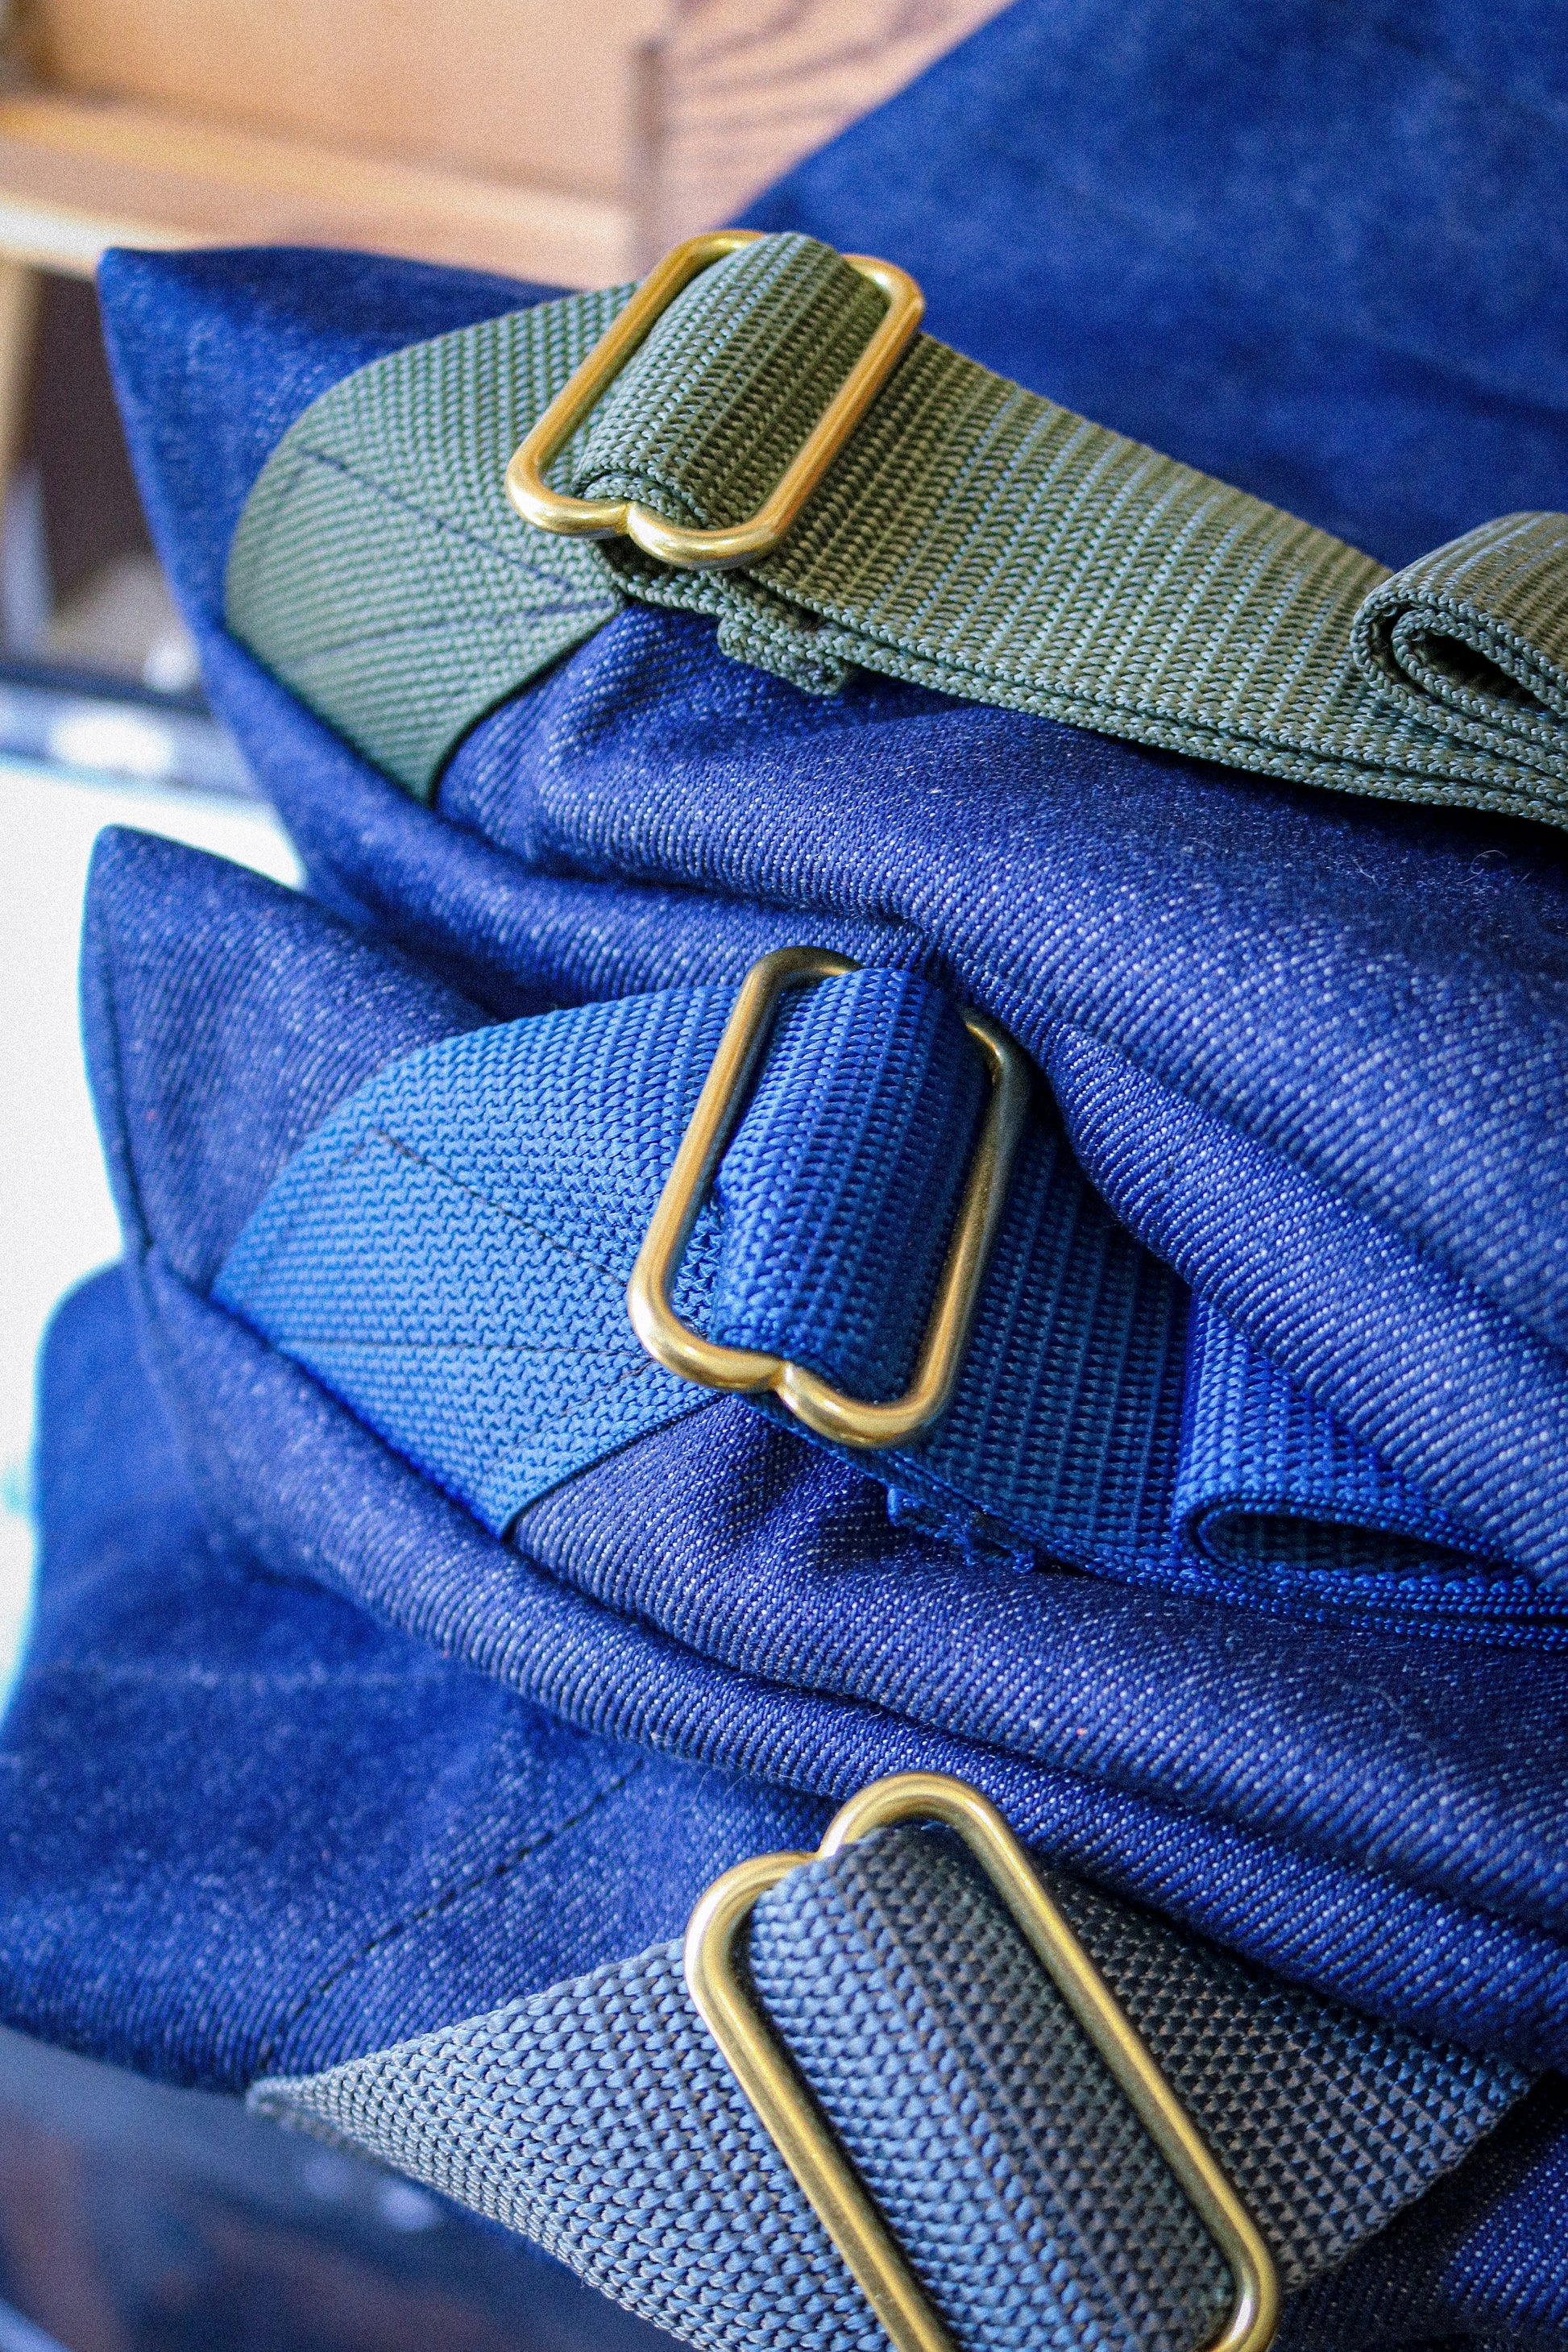 How to fold the backpack straps 